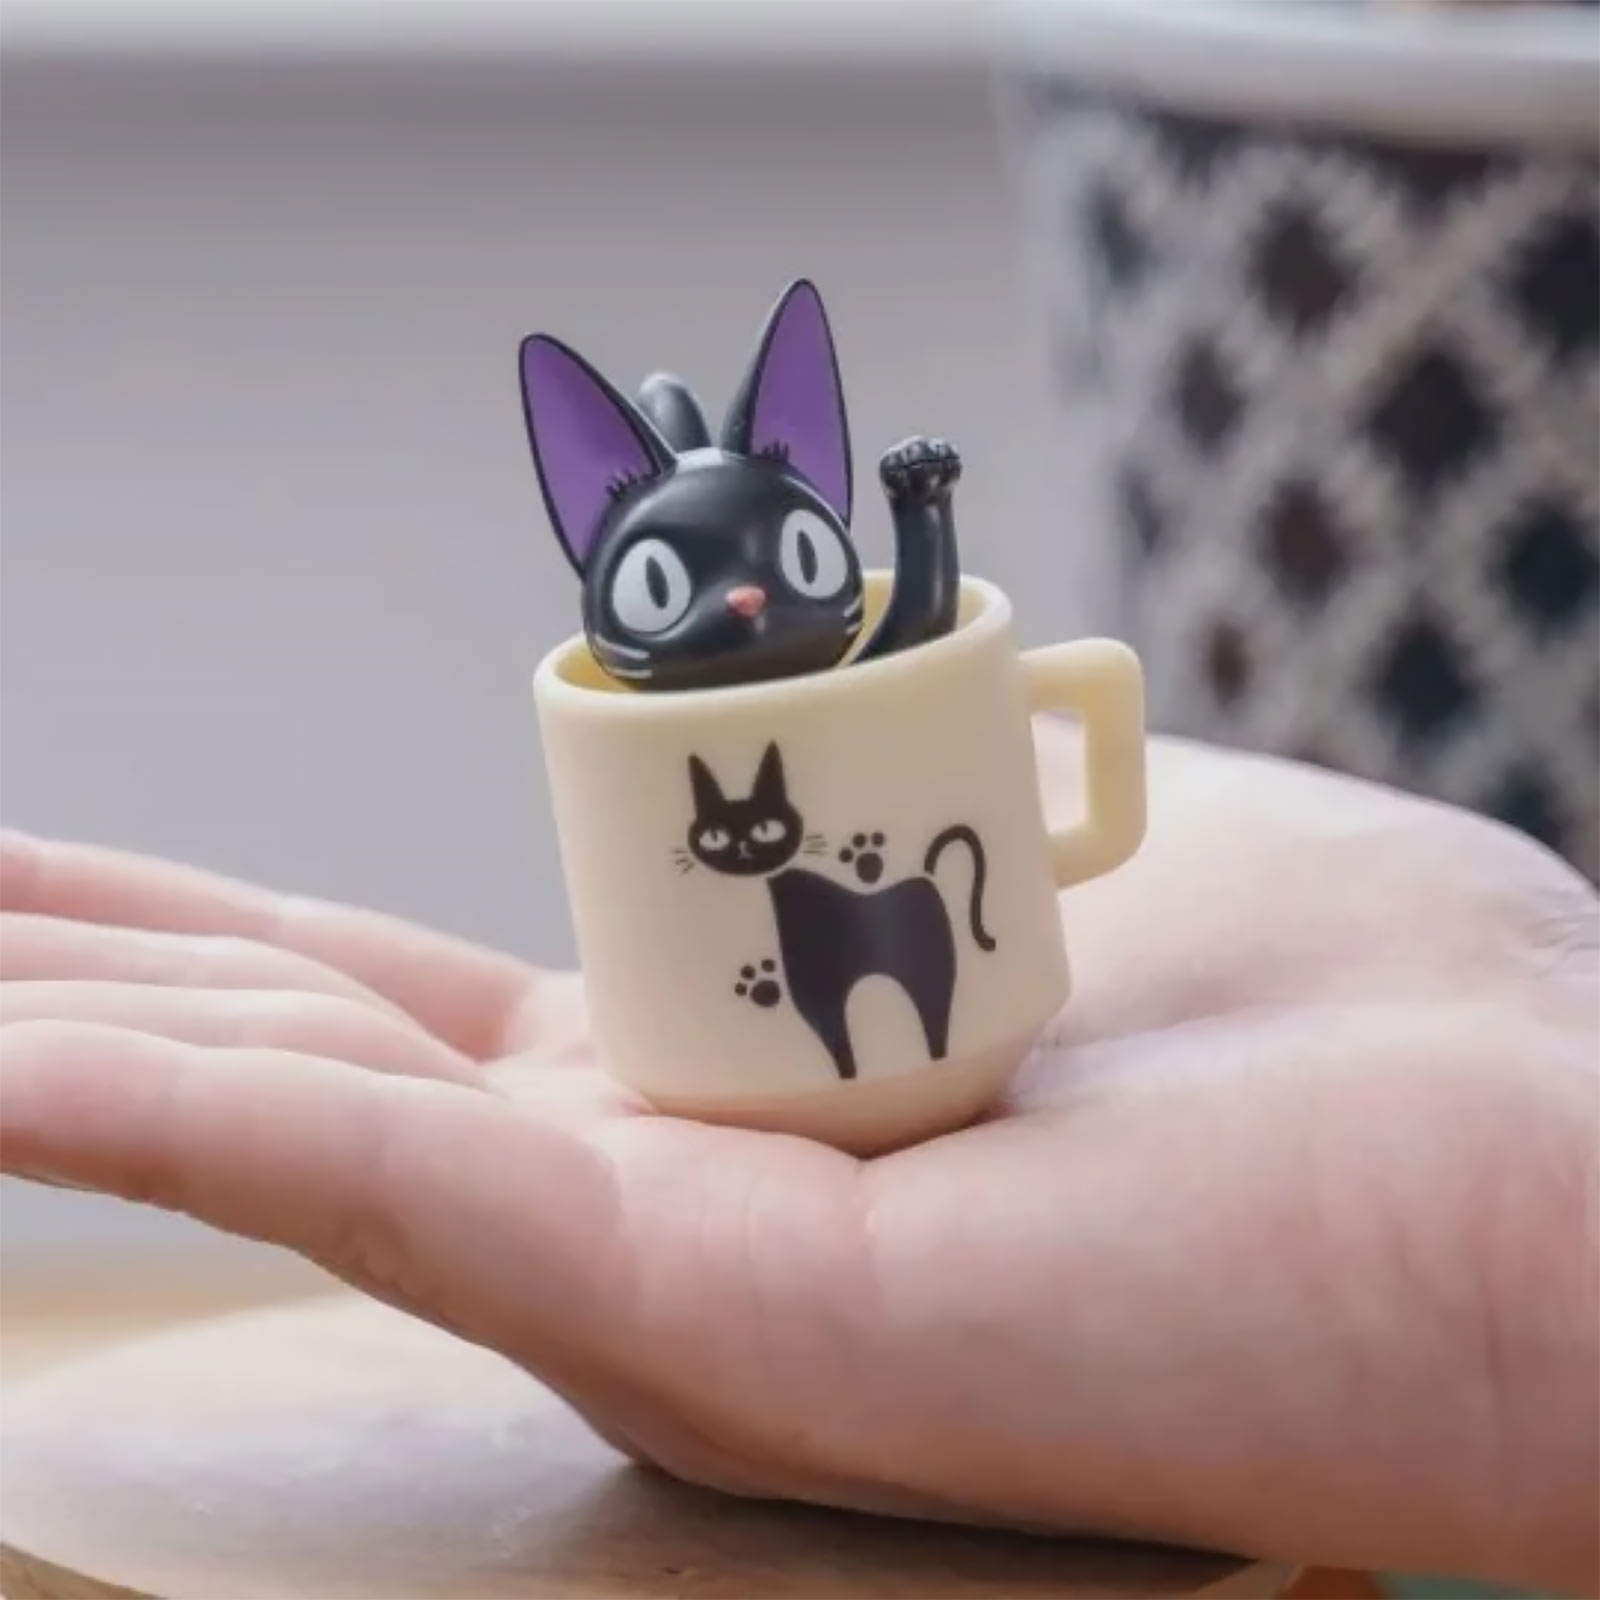 Kiki's Delivery Service - Jiji in Cup Roly-poly Figure